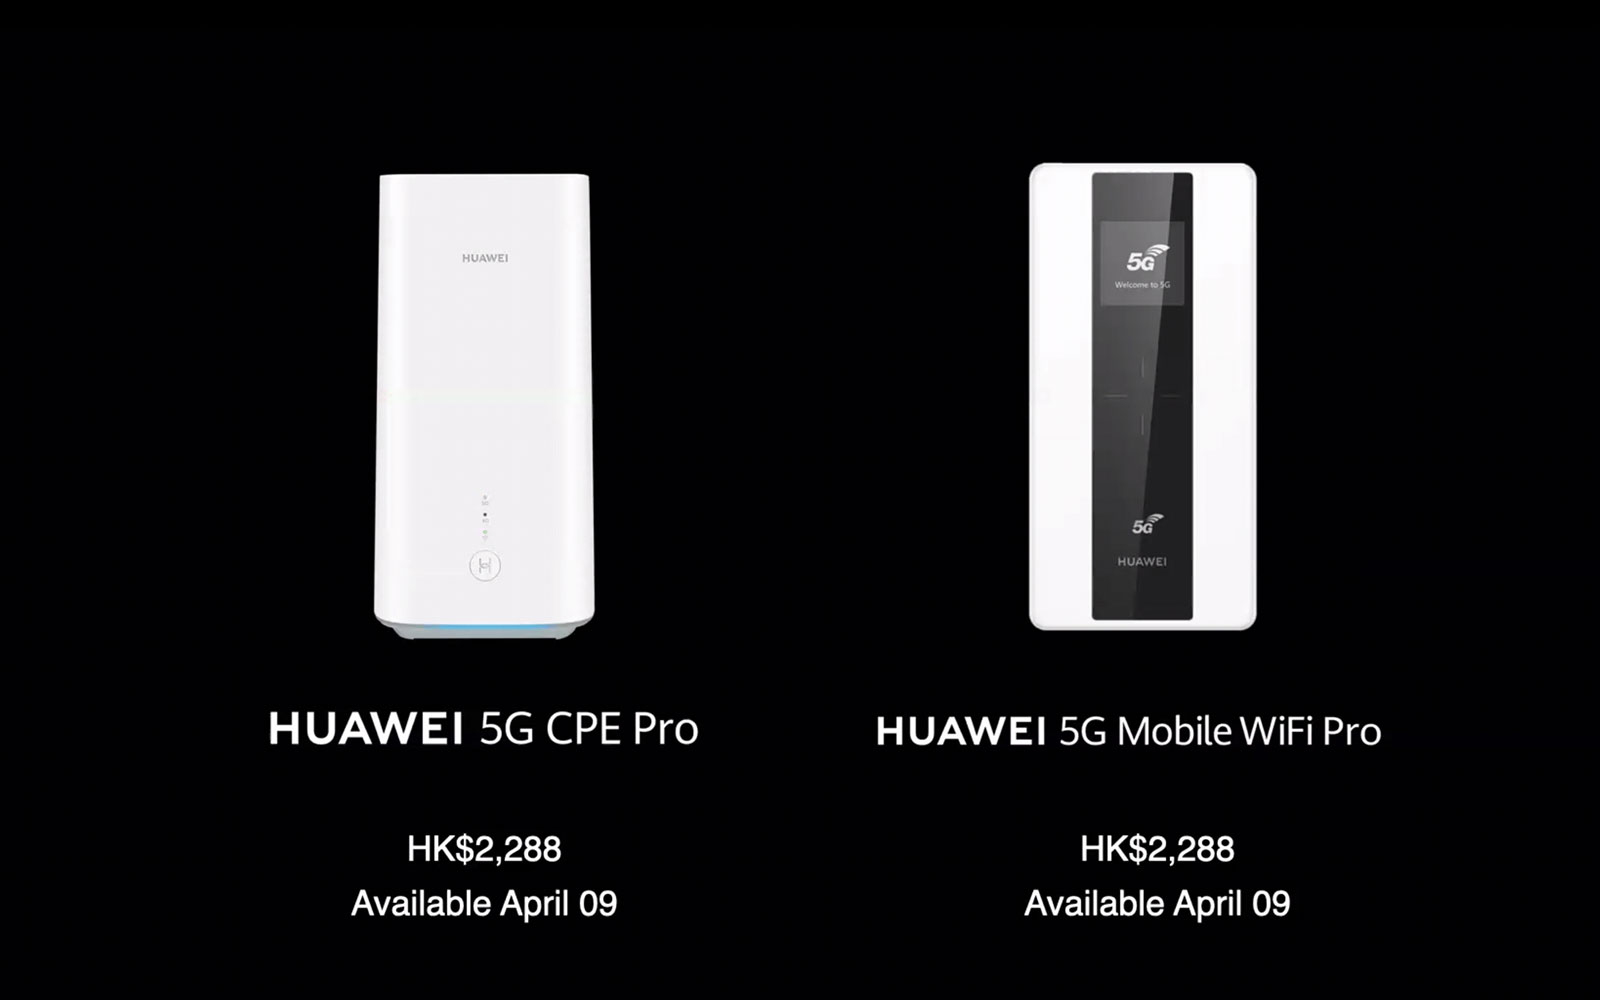 Huawei 5G products HK